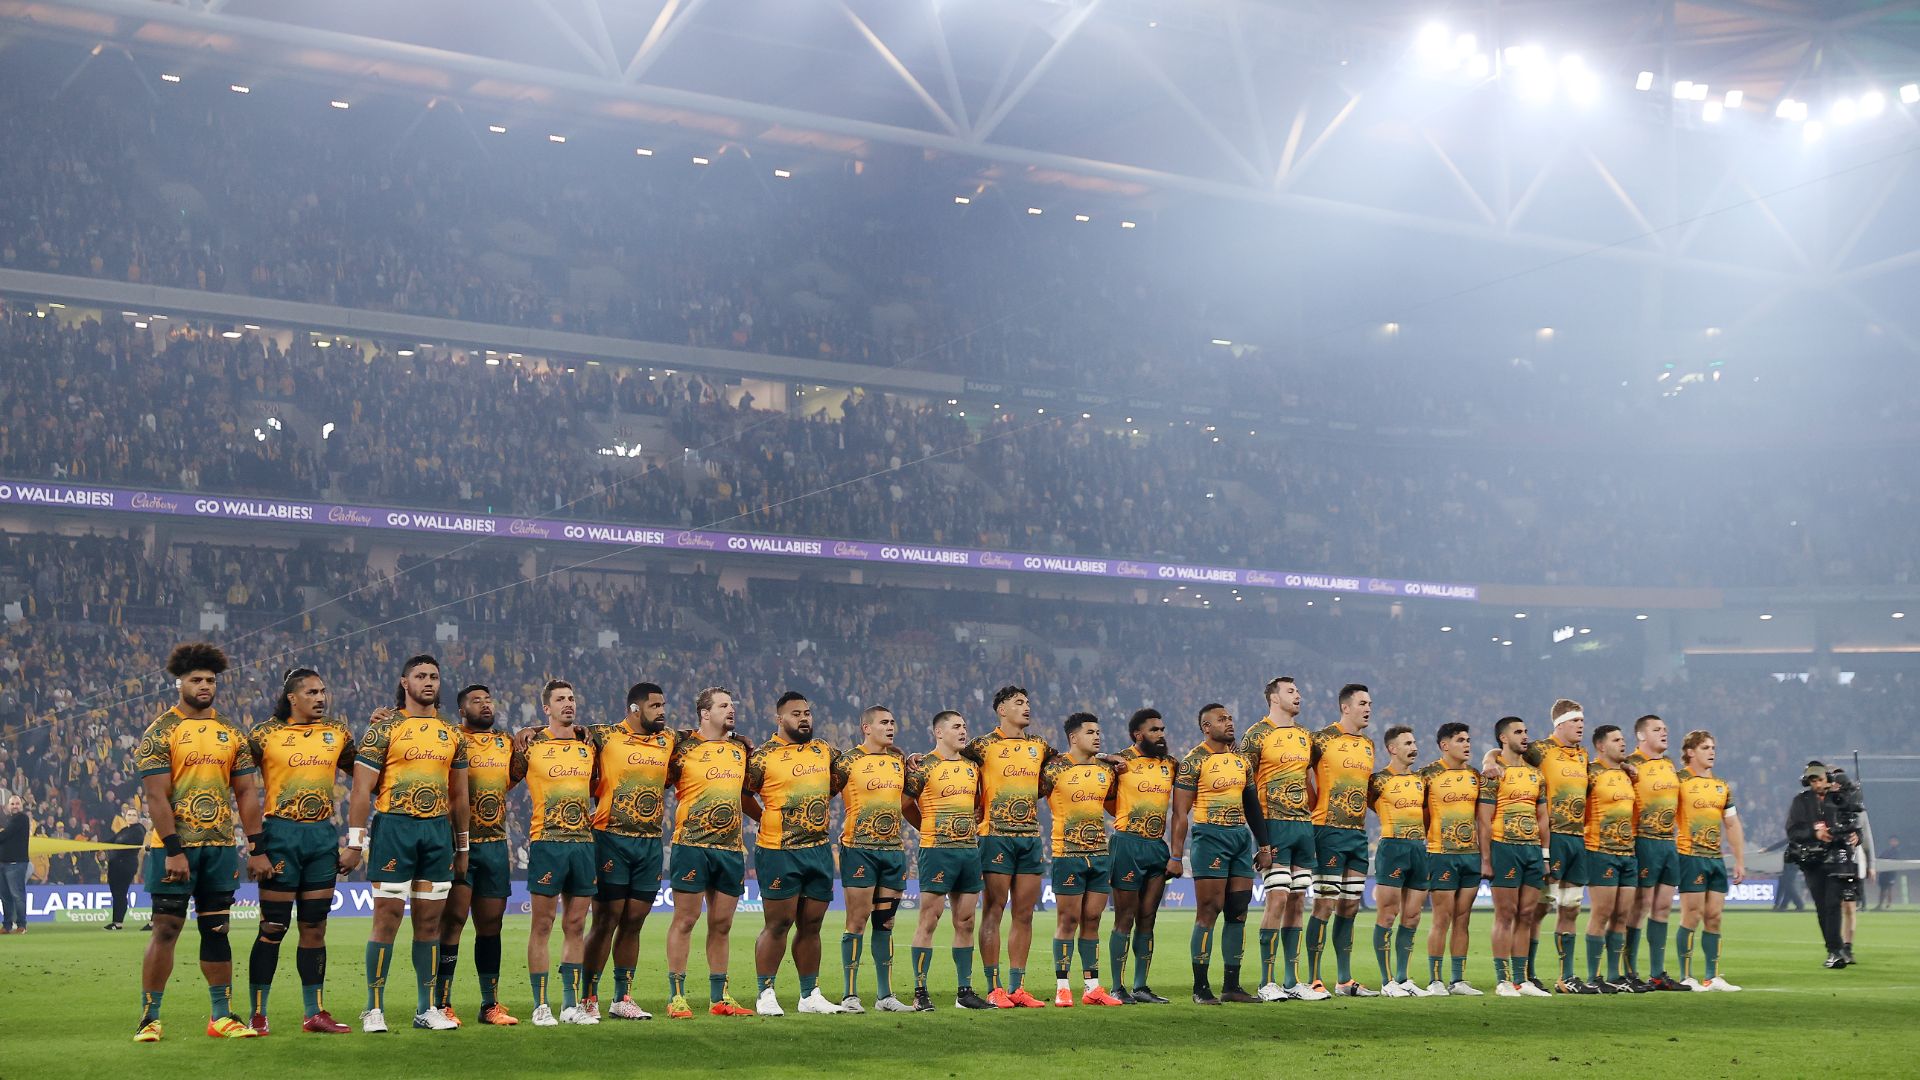 Wallabies team standing for the National Anthem